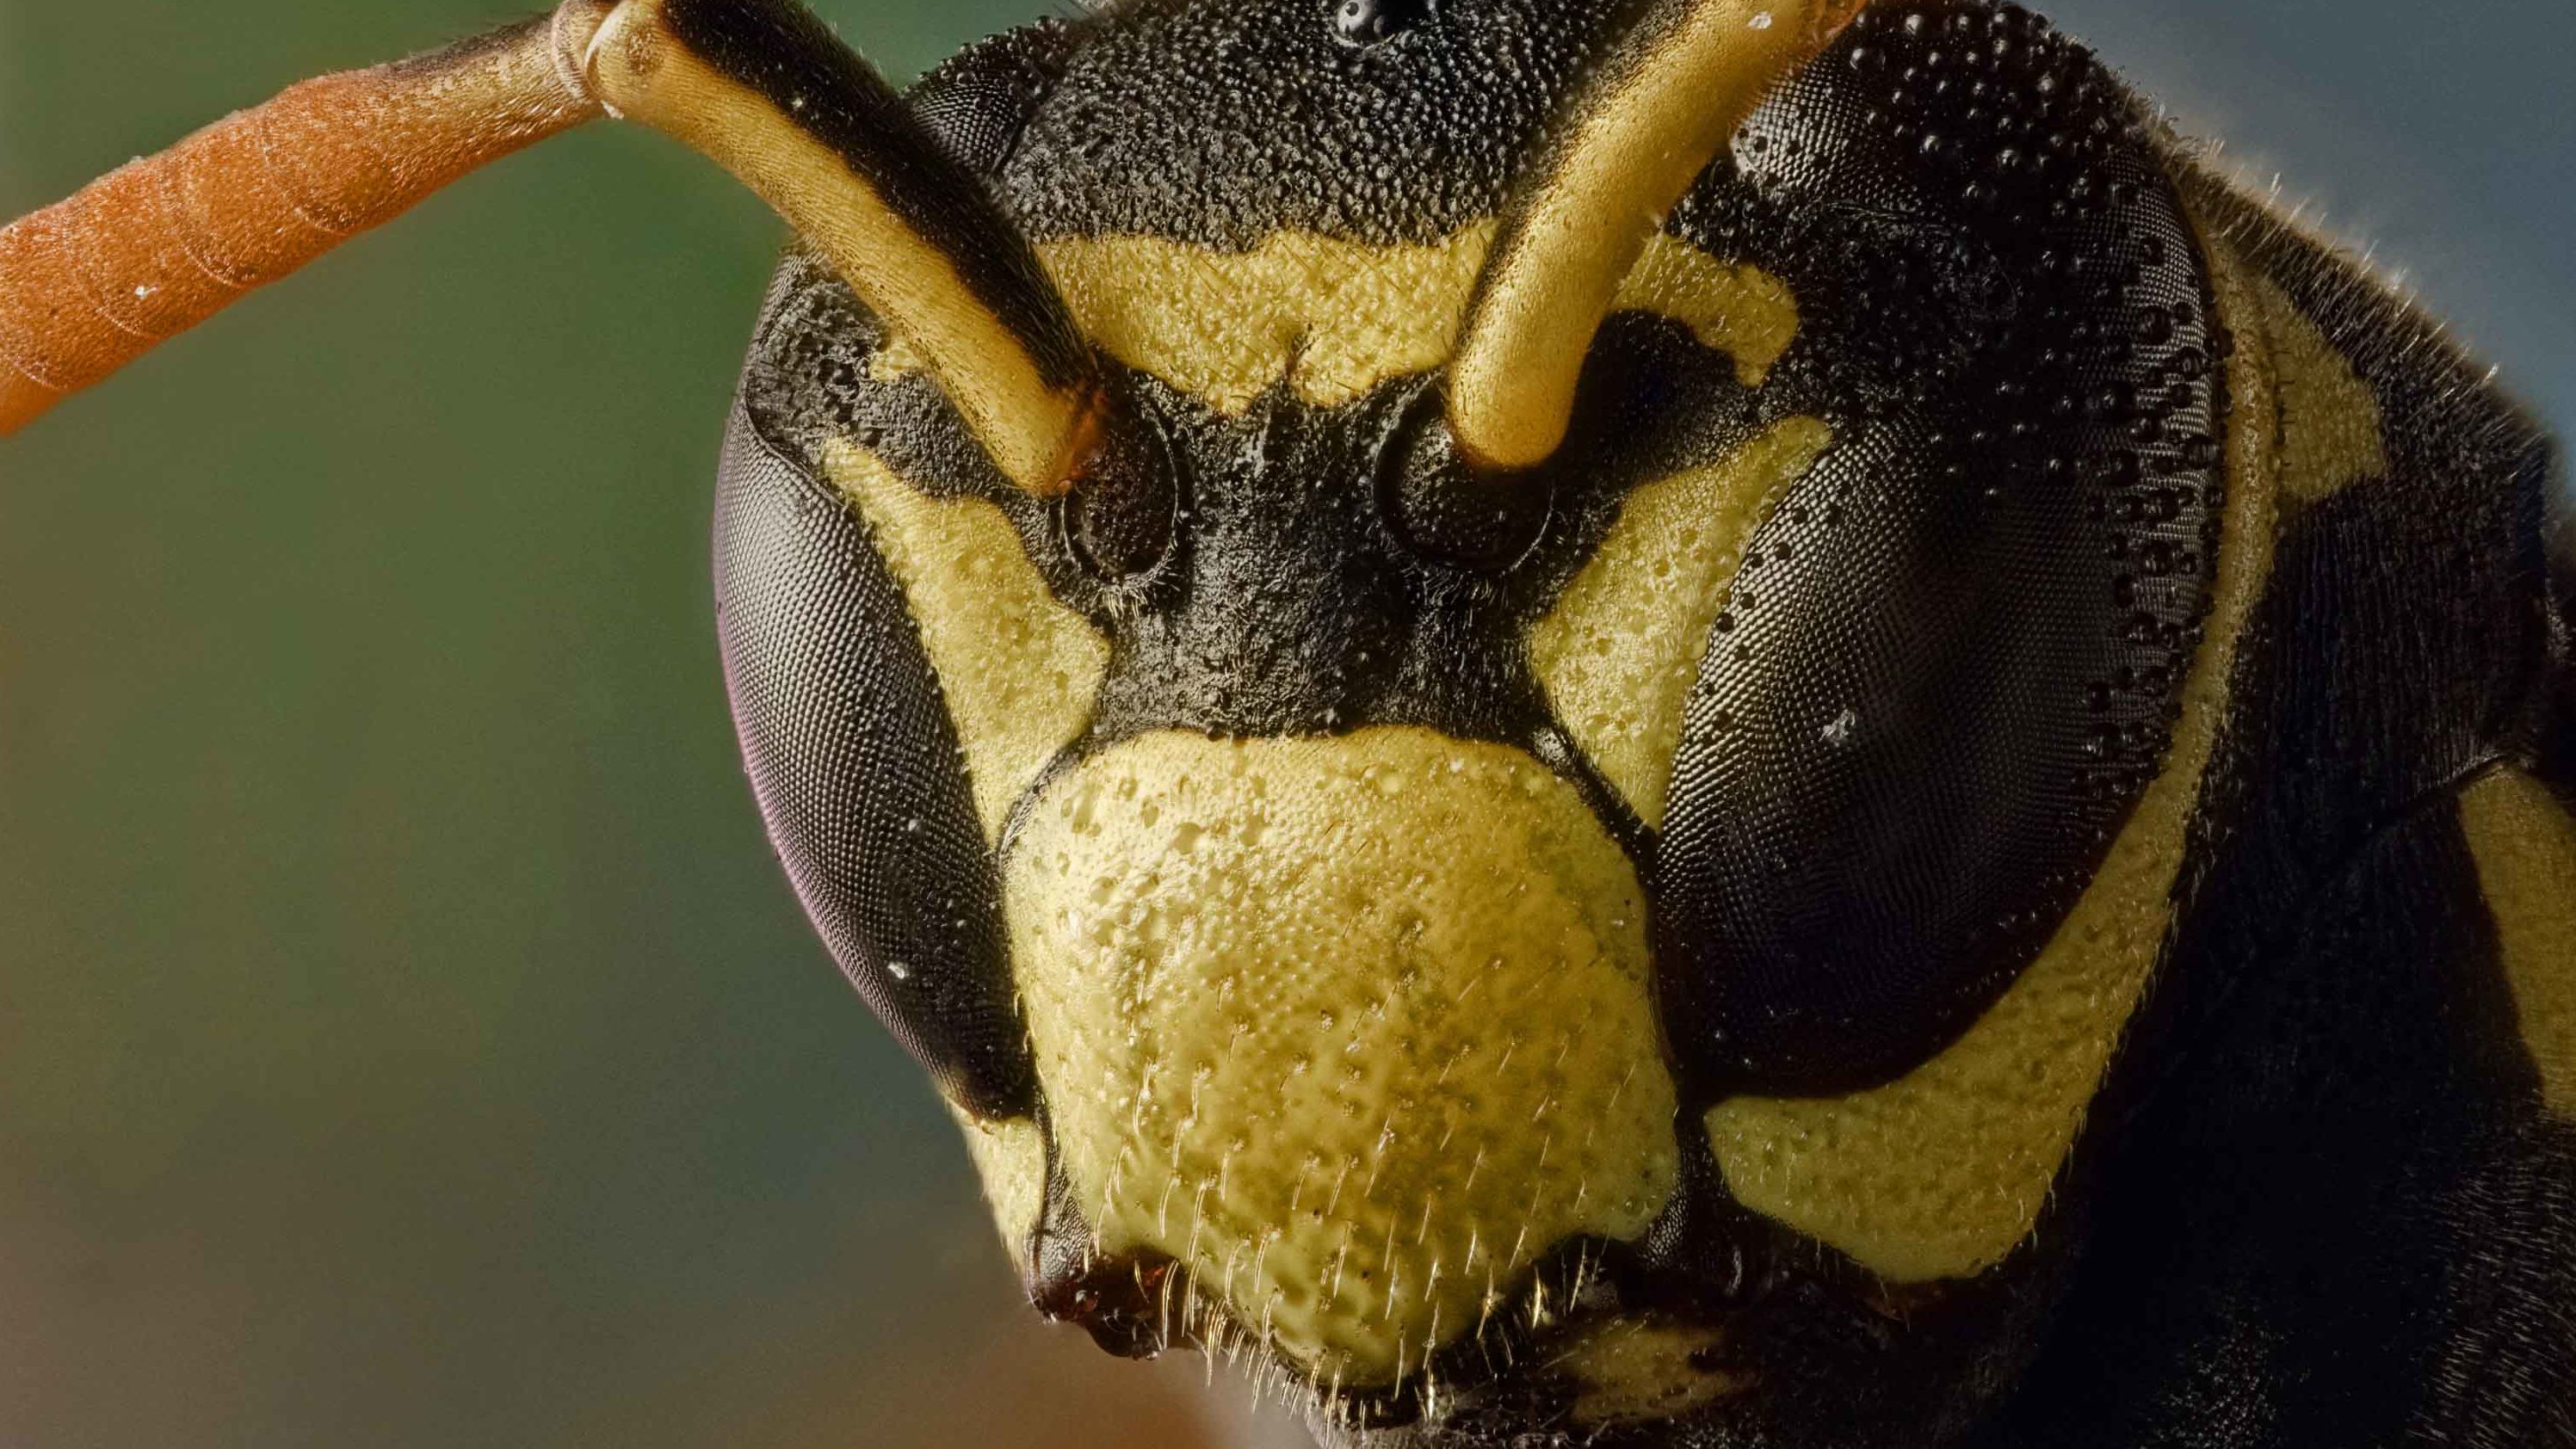 Paper wasps are the first invertebrates to show evidence of transitive inference, a kind of logical reasoning.